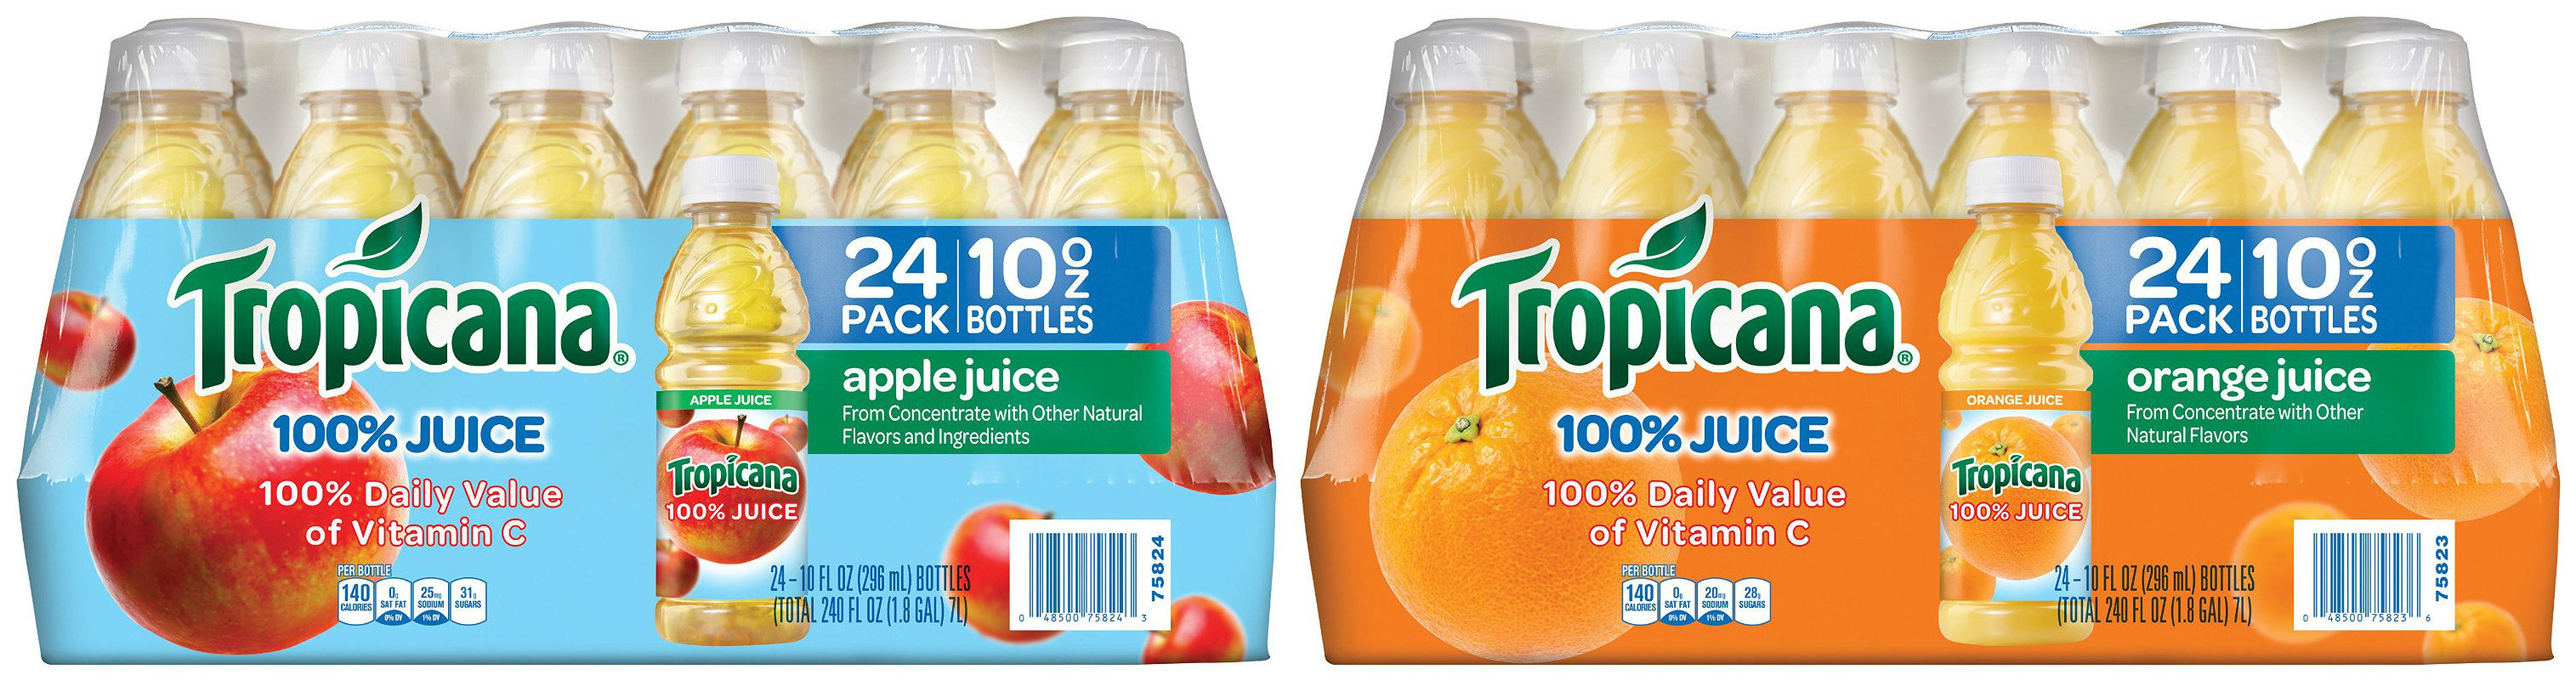 grocery stores that sell tropicana apple juice